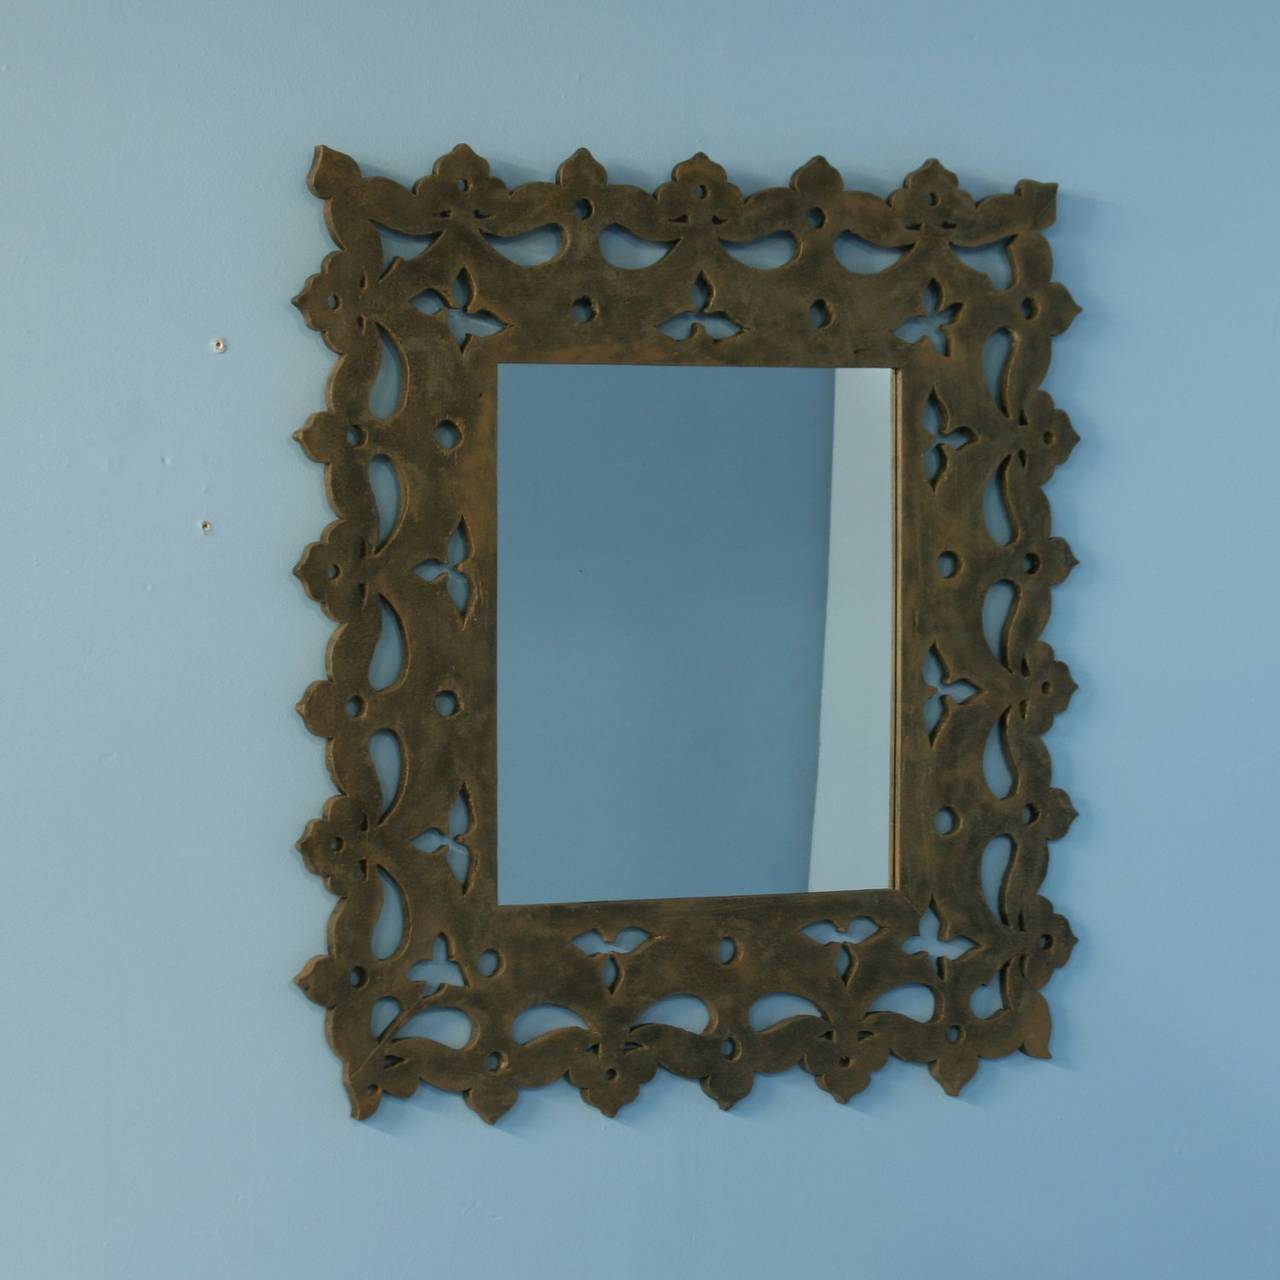 This highly decorative and unique mirror was made from architectural elements (trim molding from old buildings). Note the unique, faded black paint. The natural distressing adds to the character and charm of this one of a kind mirror. It currently